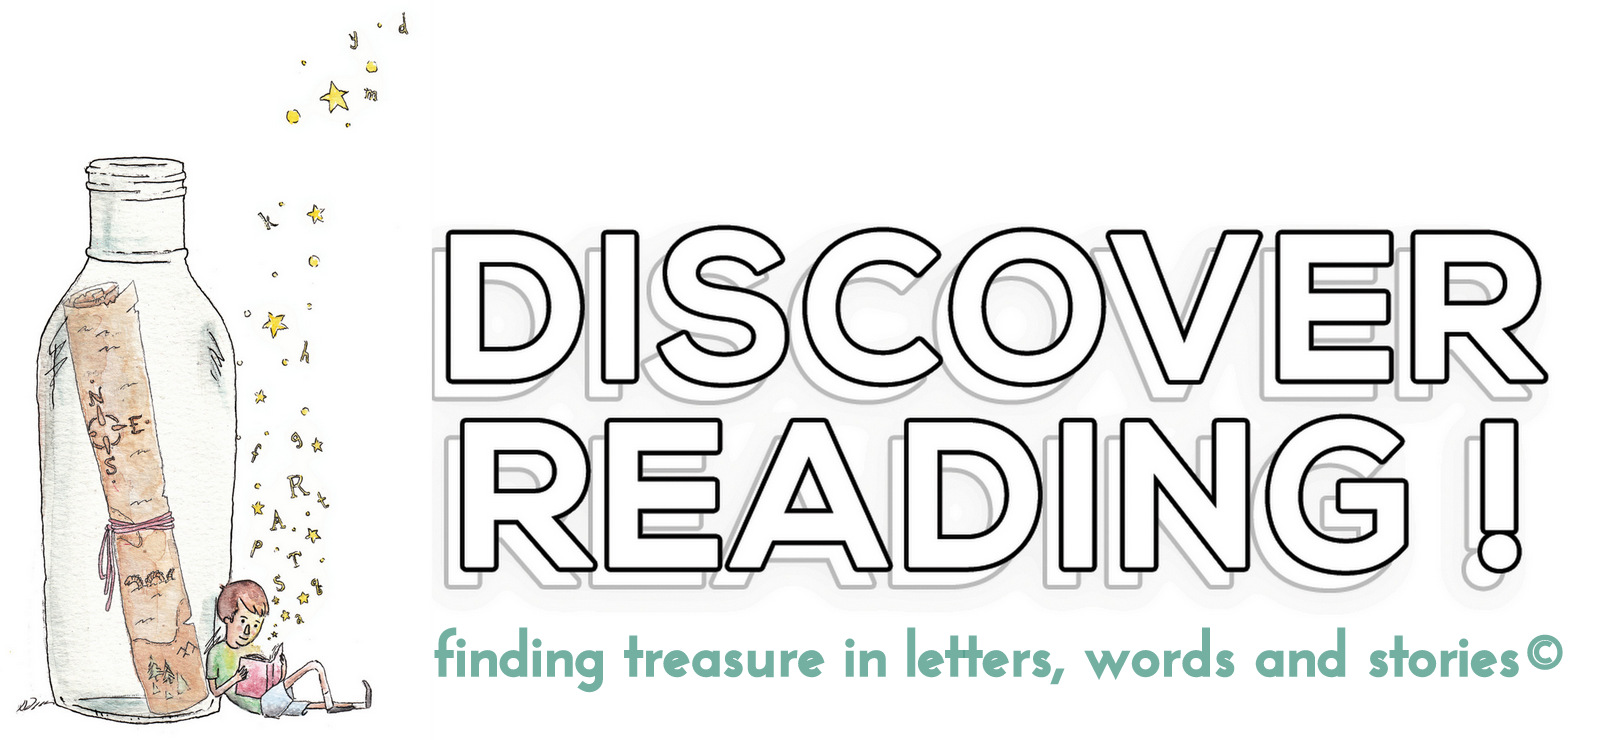 Discover Reading!